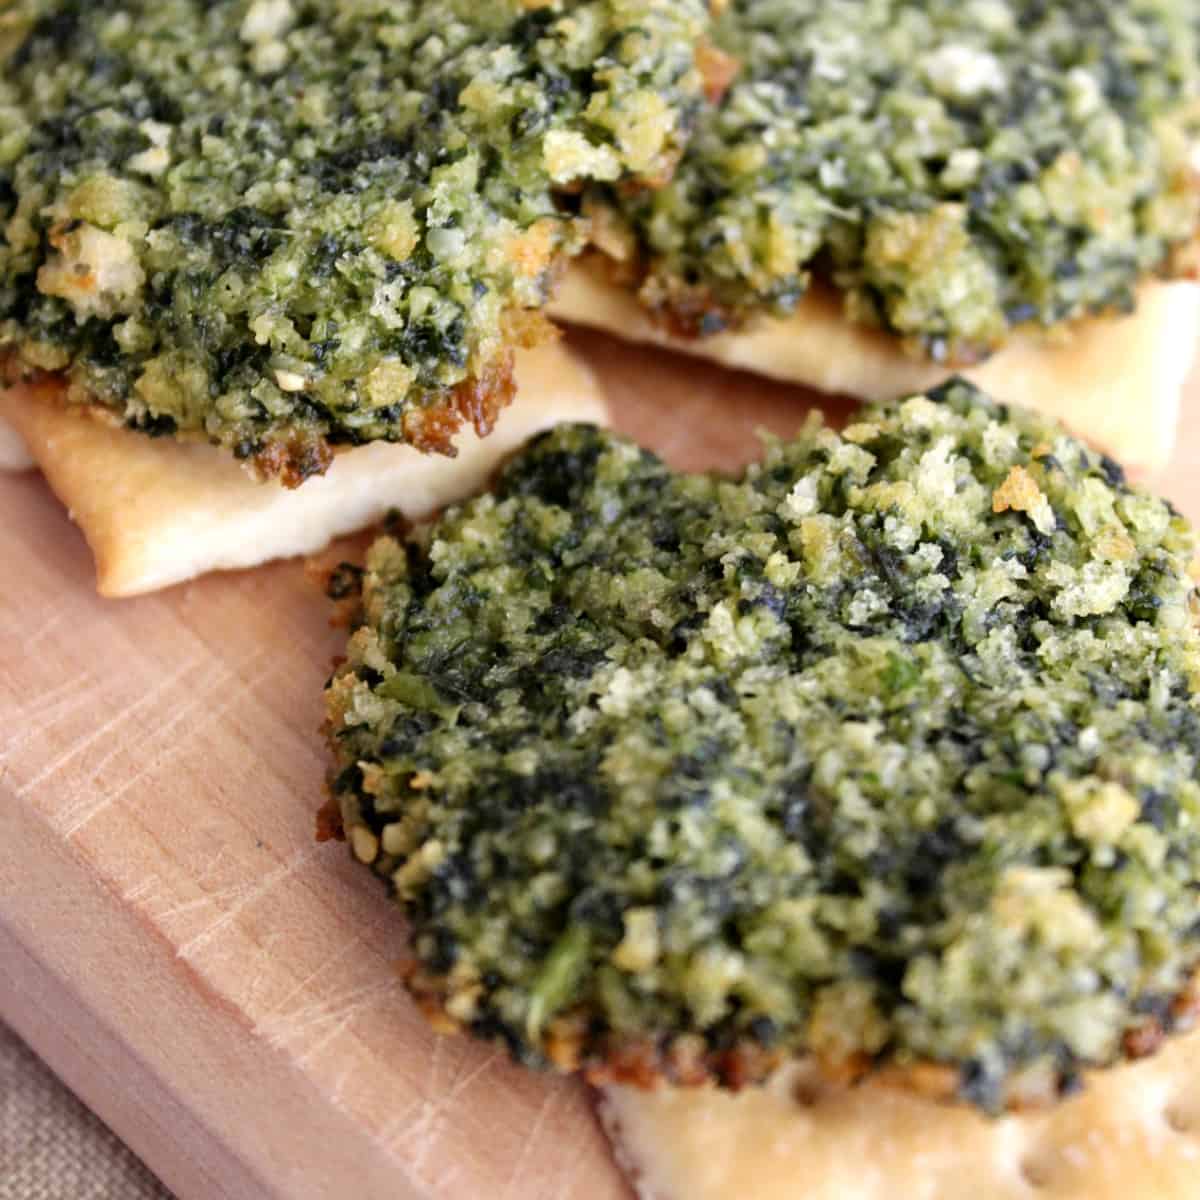 Club crackers with rounds of pesto.